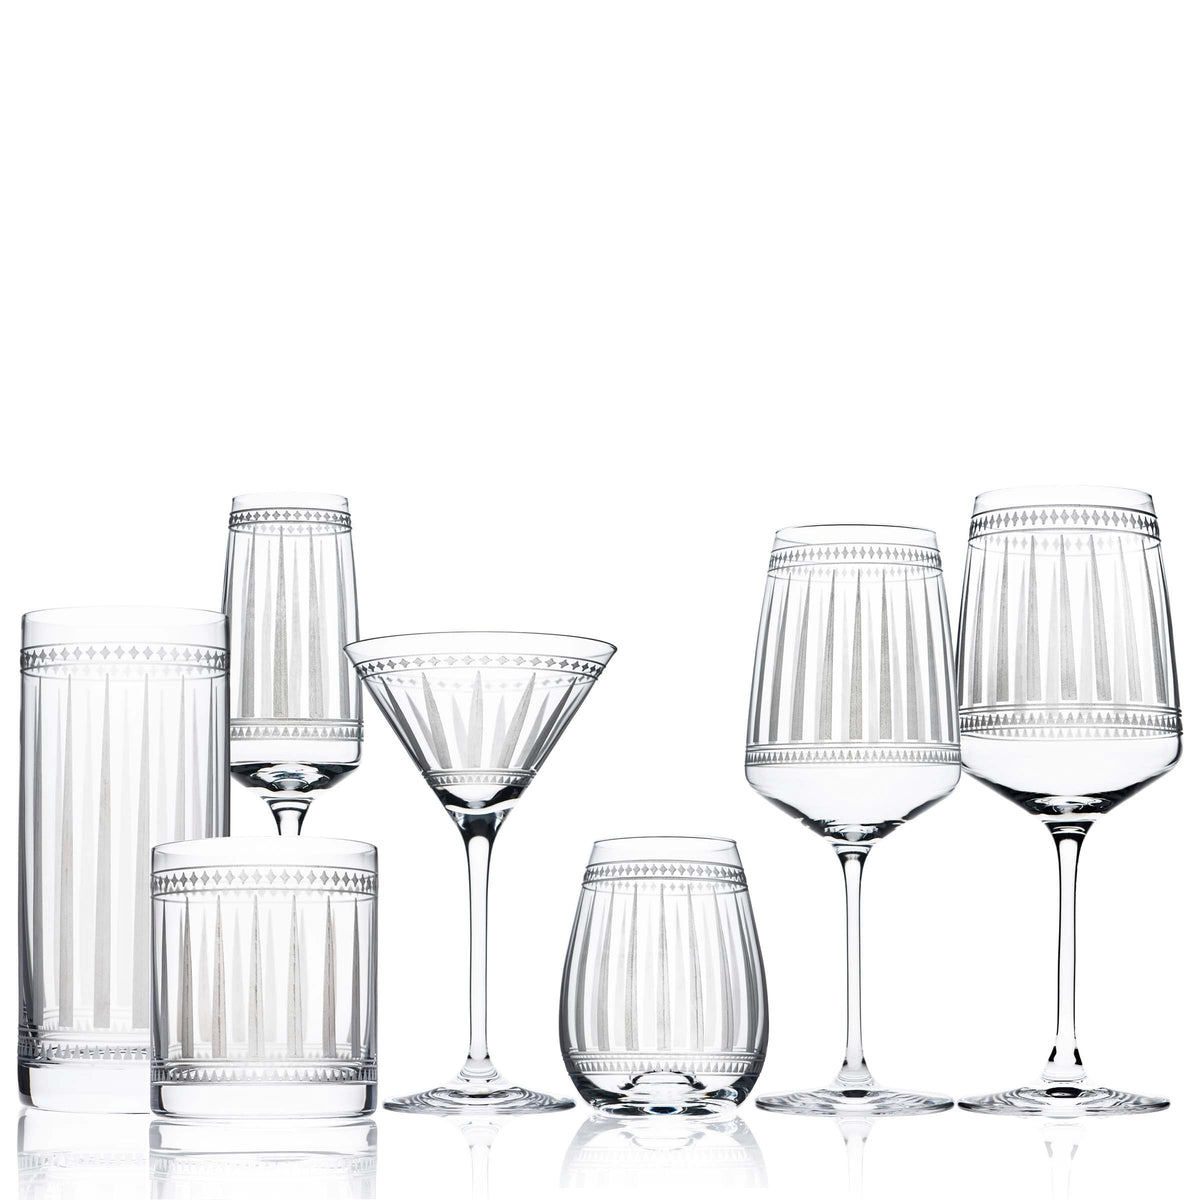 Elegant Marrakech Red Wine Glasses with a white background from Caskata Artisanal Home.